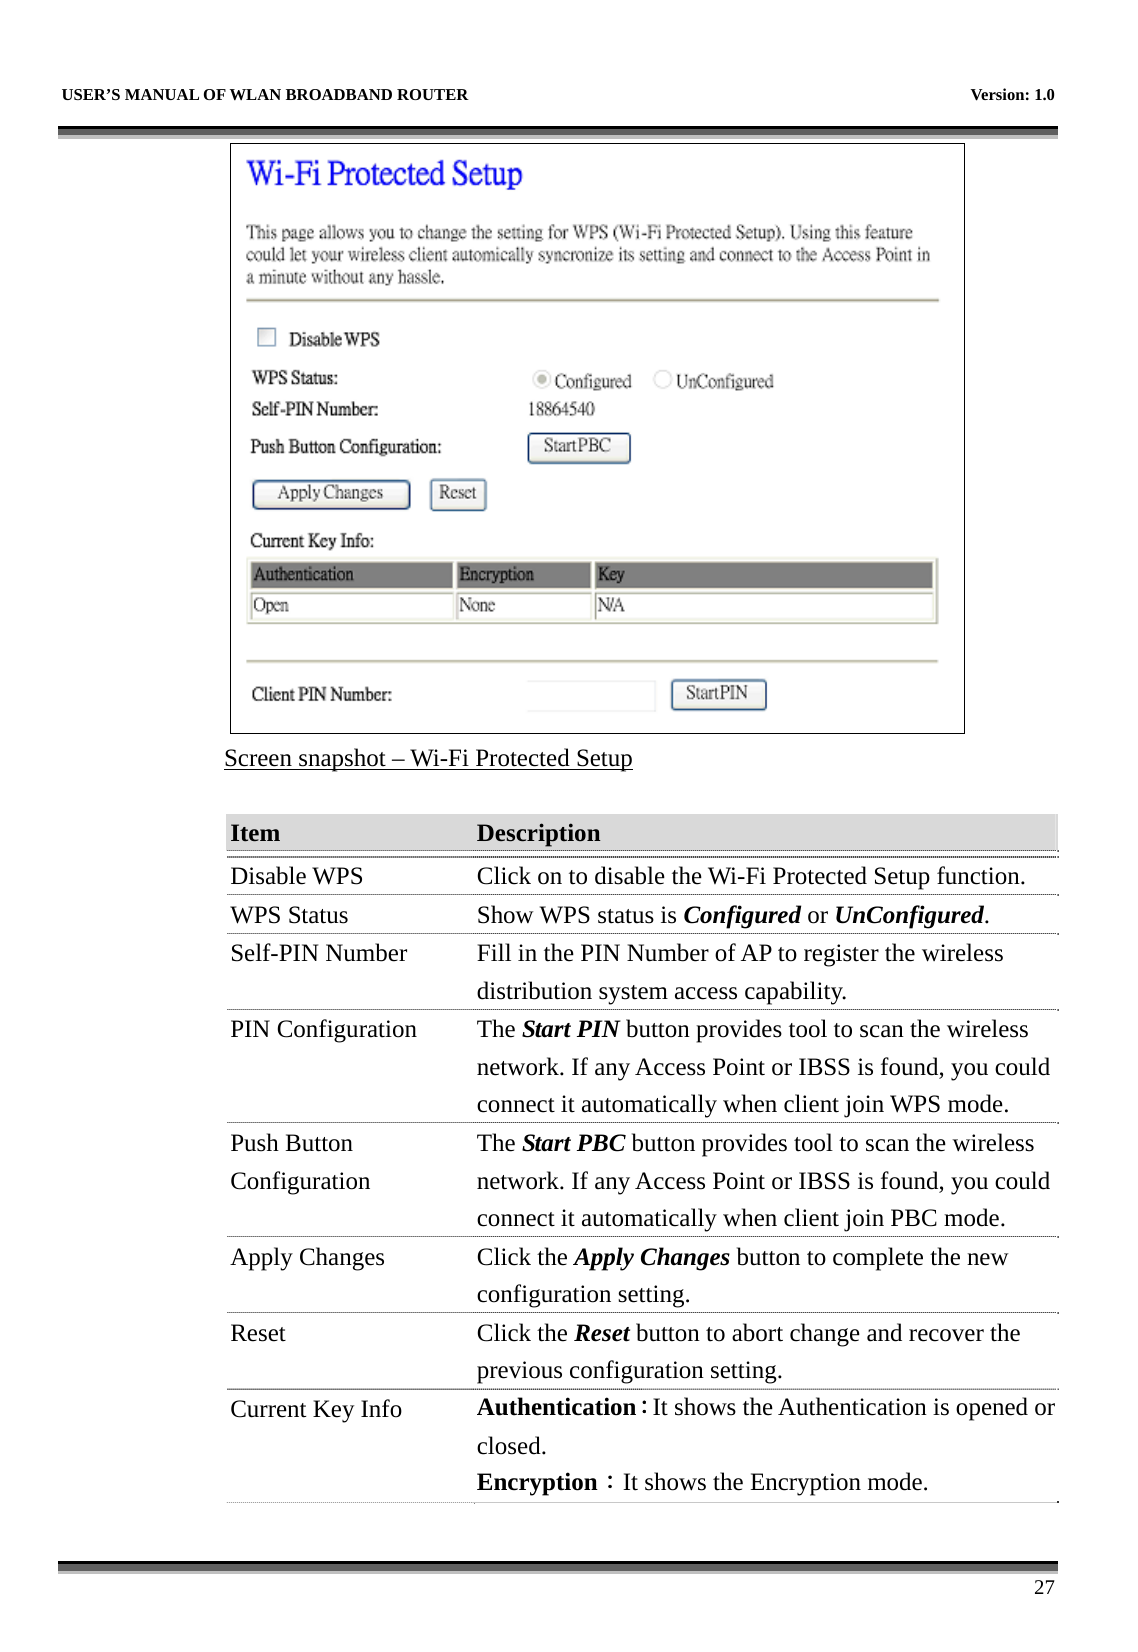   USER’S MANUAL OF WLAN BROADBAND ROUTER    Version: 1.0      27  Screen snapshot – Wi-Fi Protected Setup  Item  Description   Disable WPS  Click on to disable the Wi-Fi Protected Setup function. WPS Status  Show WPS status is Configured or UnConfigured. Self-PIN Number  Fill in the PIN Number of AP to register the wireless distribution system access capability. PIN Configuration  The Start PIN button provides tool to scan the wireless network. If any Access Point or IBSS is found, you could connect it automatically when client join WPS mode. Push Button Configuration The Start PBC button provides tool to scan the wireless network. If any Access Point or IBSS is found, you could connect it automatically when client join PBC mode. Apply Changes  Click the Apply Changes button to complete the new configuration setting. Reset Click the Reset button to abort change and recover the previous configuration setting. Current Key Info Authentication：It shows the Authentication is opened or closed. Encryption：It shows the Encryption mode. 